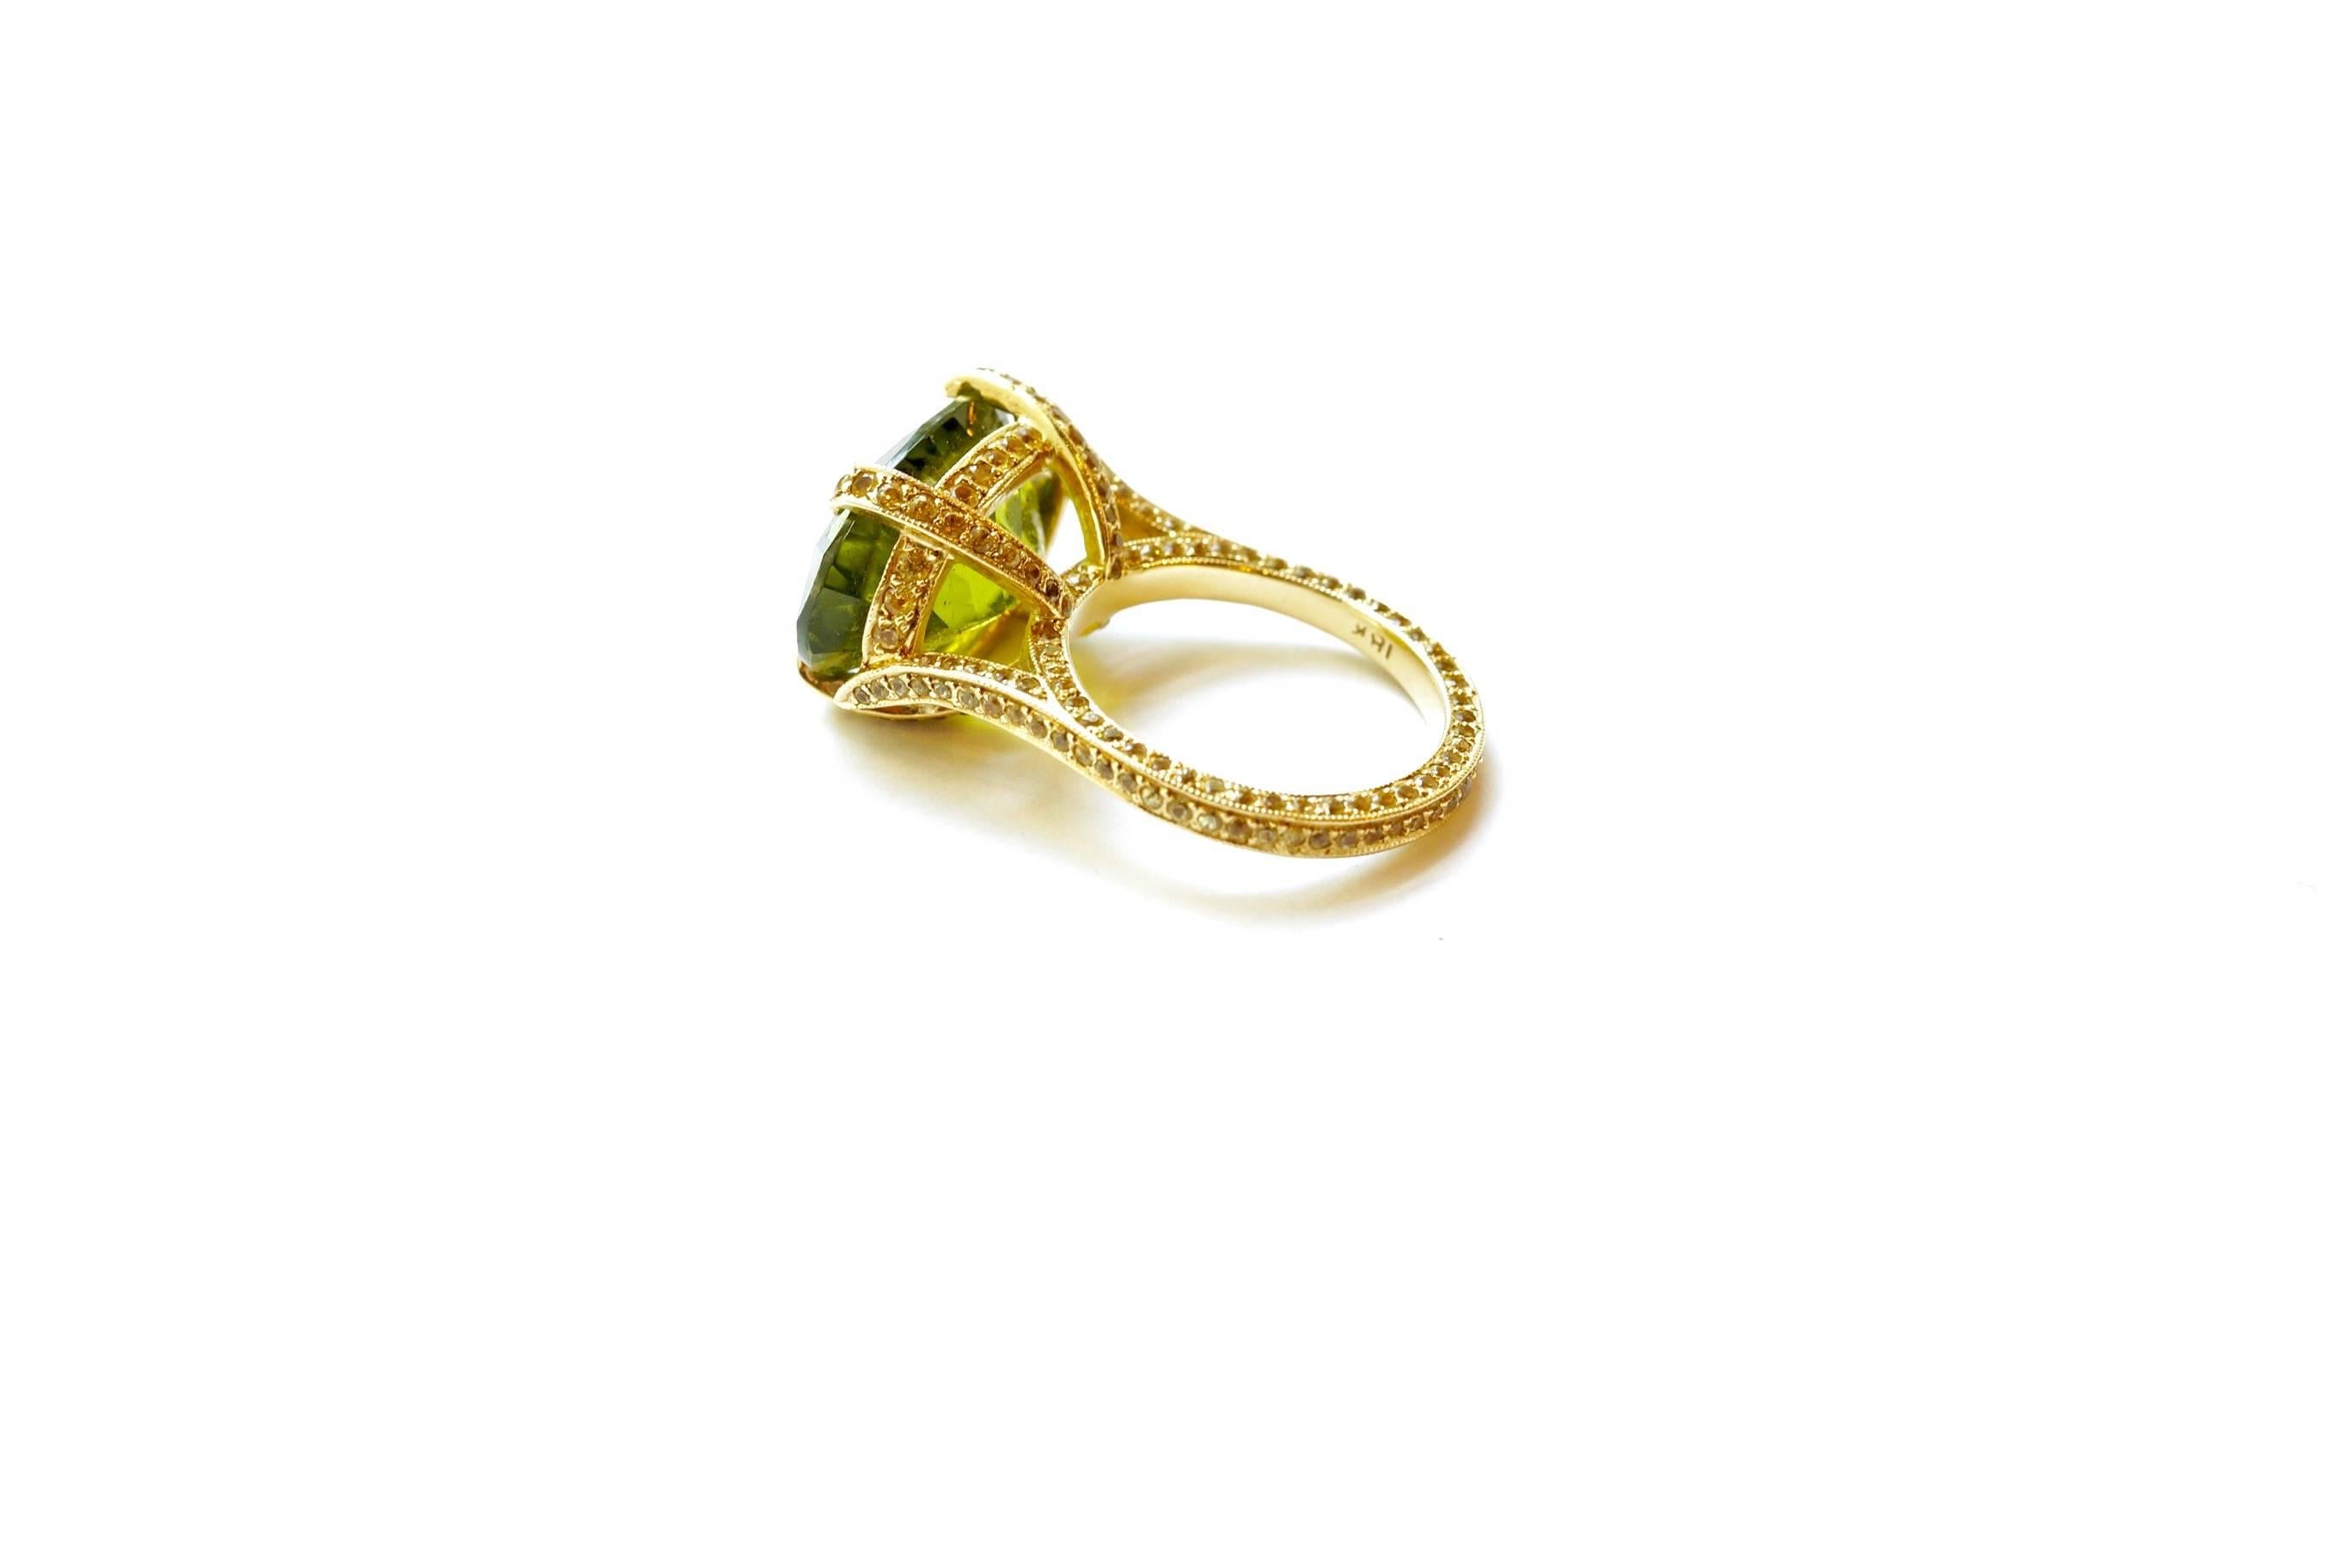 Peridot & Yellow Sapphire Big Ring
A faceted oval-shaped peridot ring set in eighteen-karat yellow gold, completely encrusted with yellow sapphires.
Size 6 ¼ - adjustable upon request (minimal charges may apply)
Peridot Total Weight – 12.20